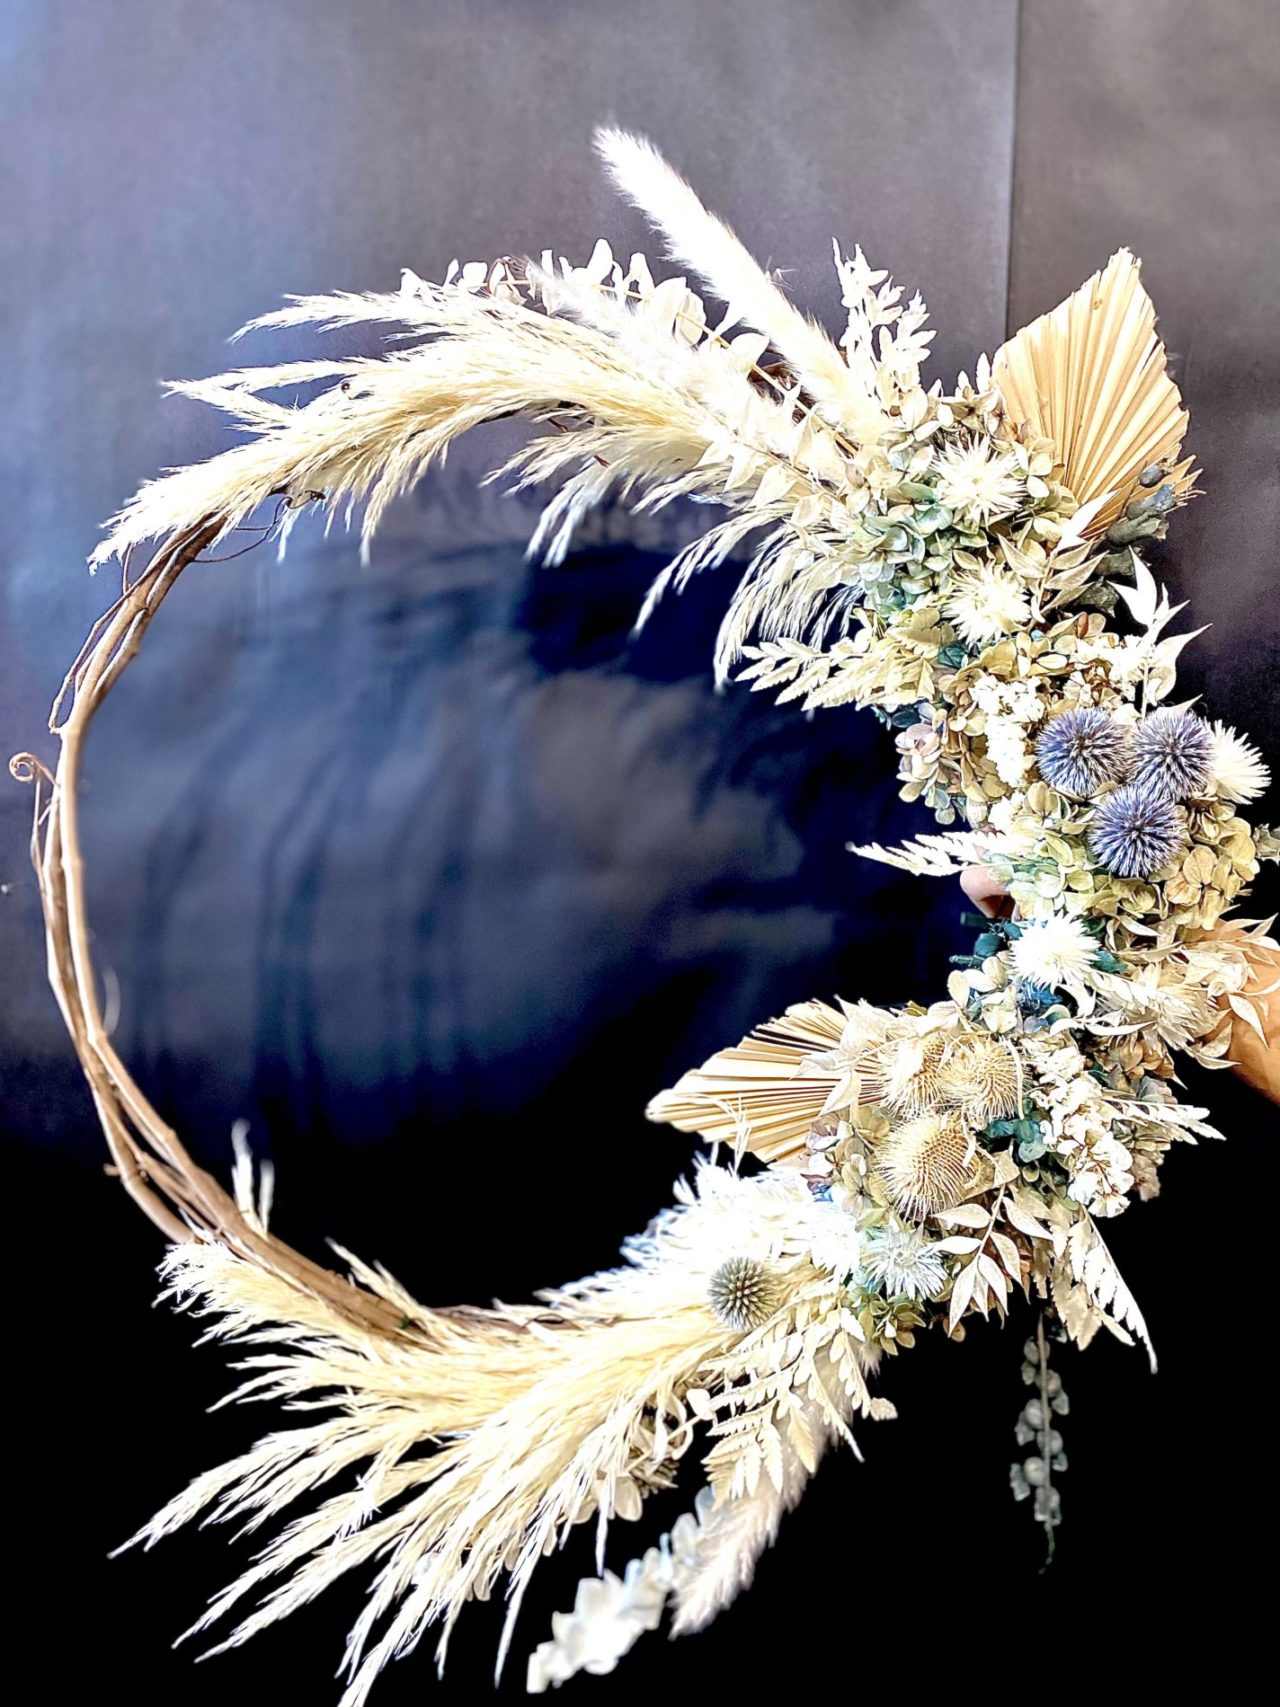 Elegant wreath on a brown table from Saley Nong of Petals and Moss during our Holiday workshop